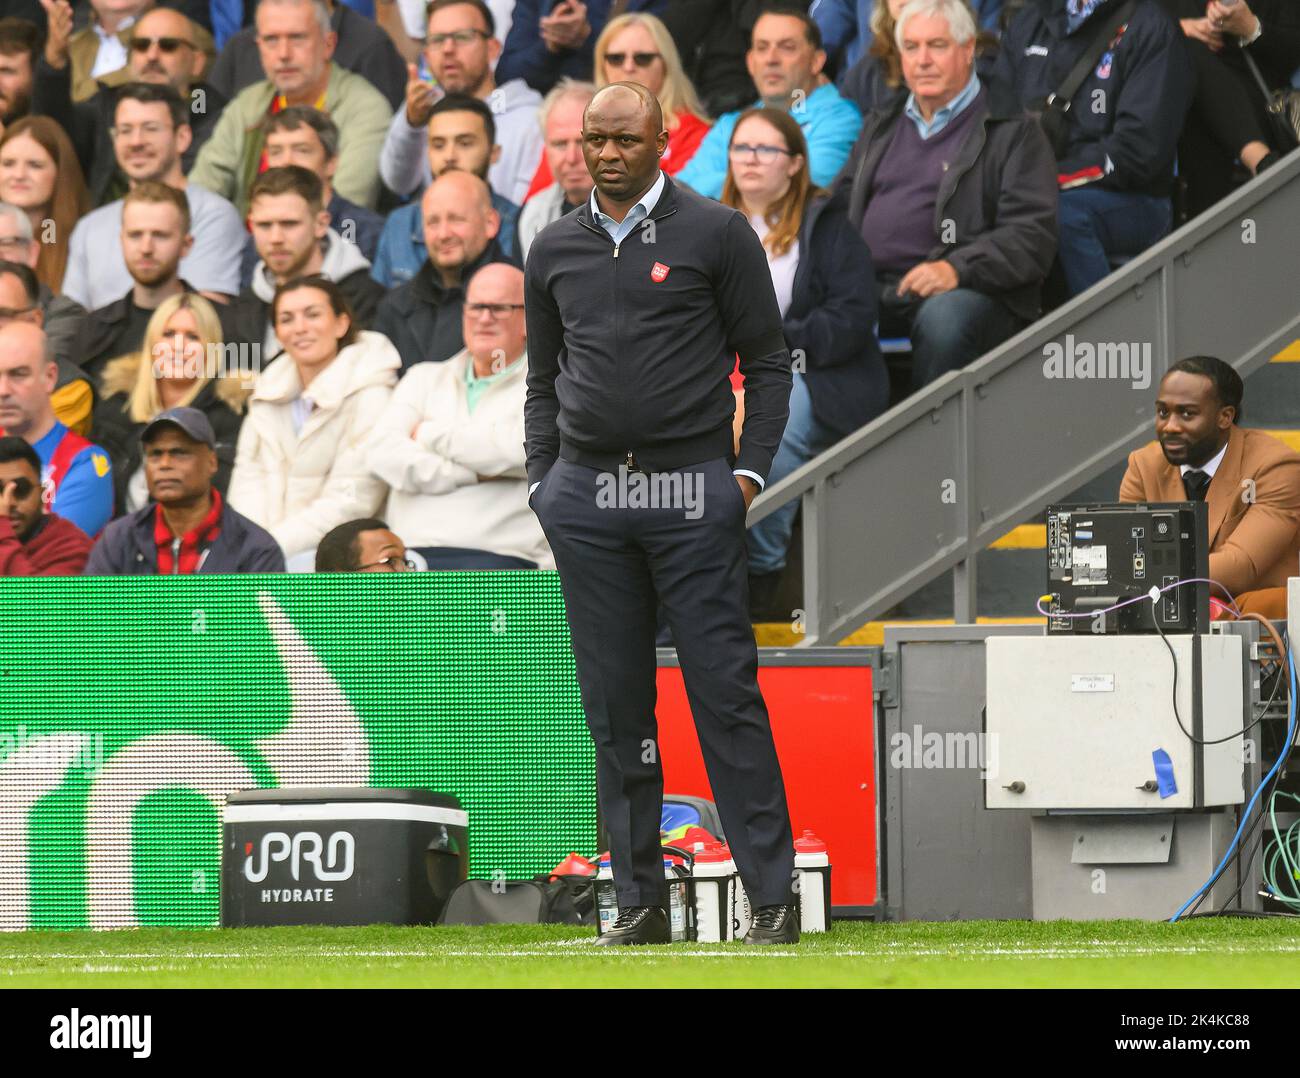 01 Oct 2022 - Crystal Palace v Chelsea - Premier League - Selhurst Park  Crystal Palace Manager Patrick Vieira during the Premier League match against Chelsea. Picture : Mark Pain / Alamy Live News Stock Photo